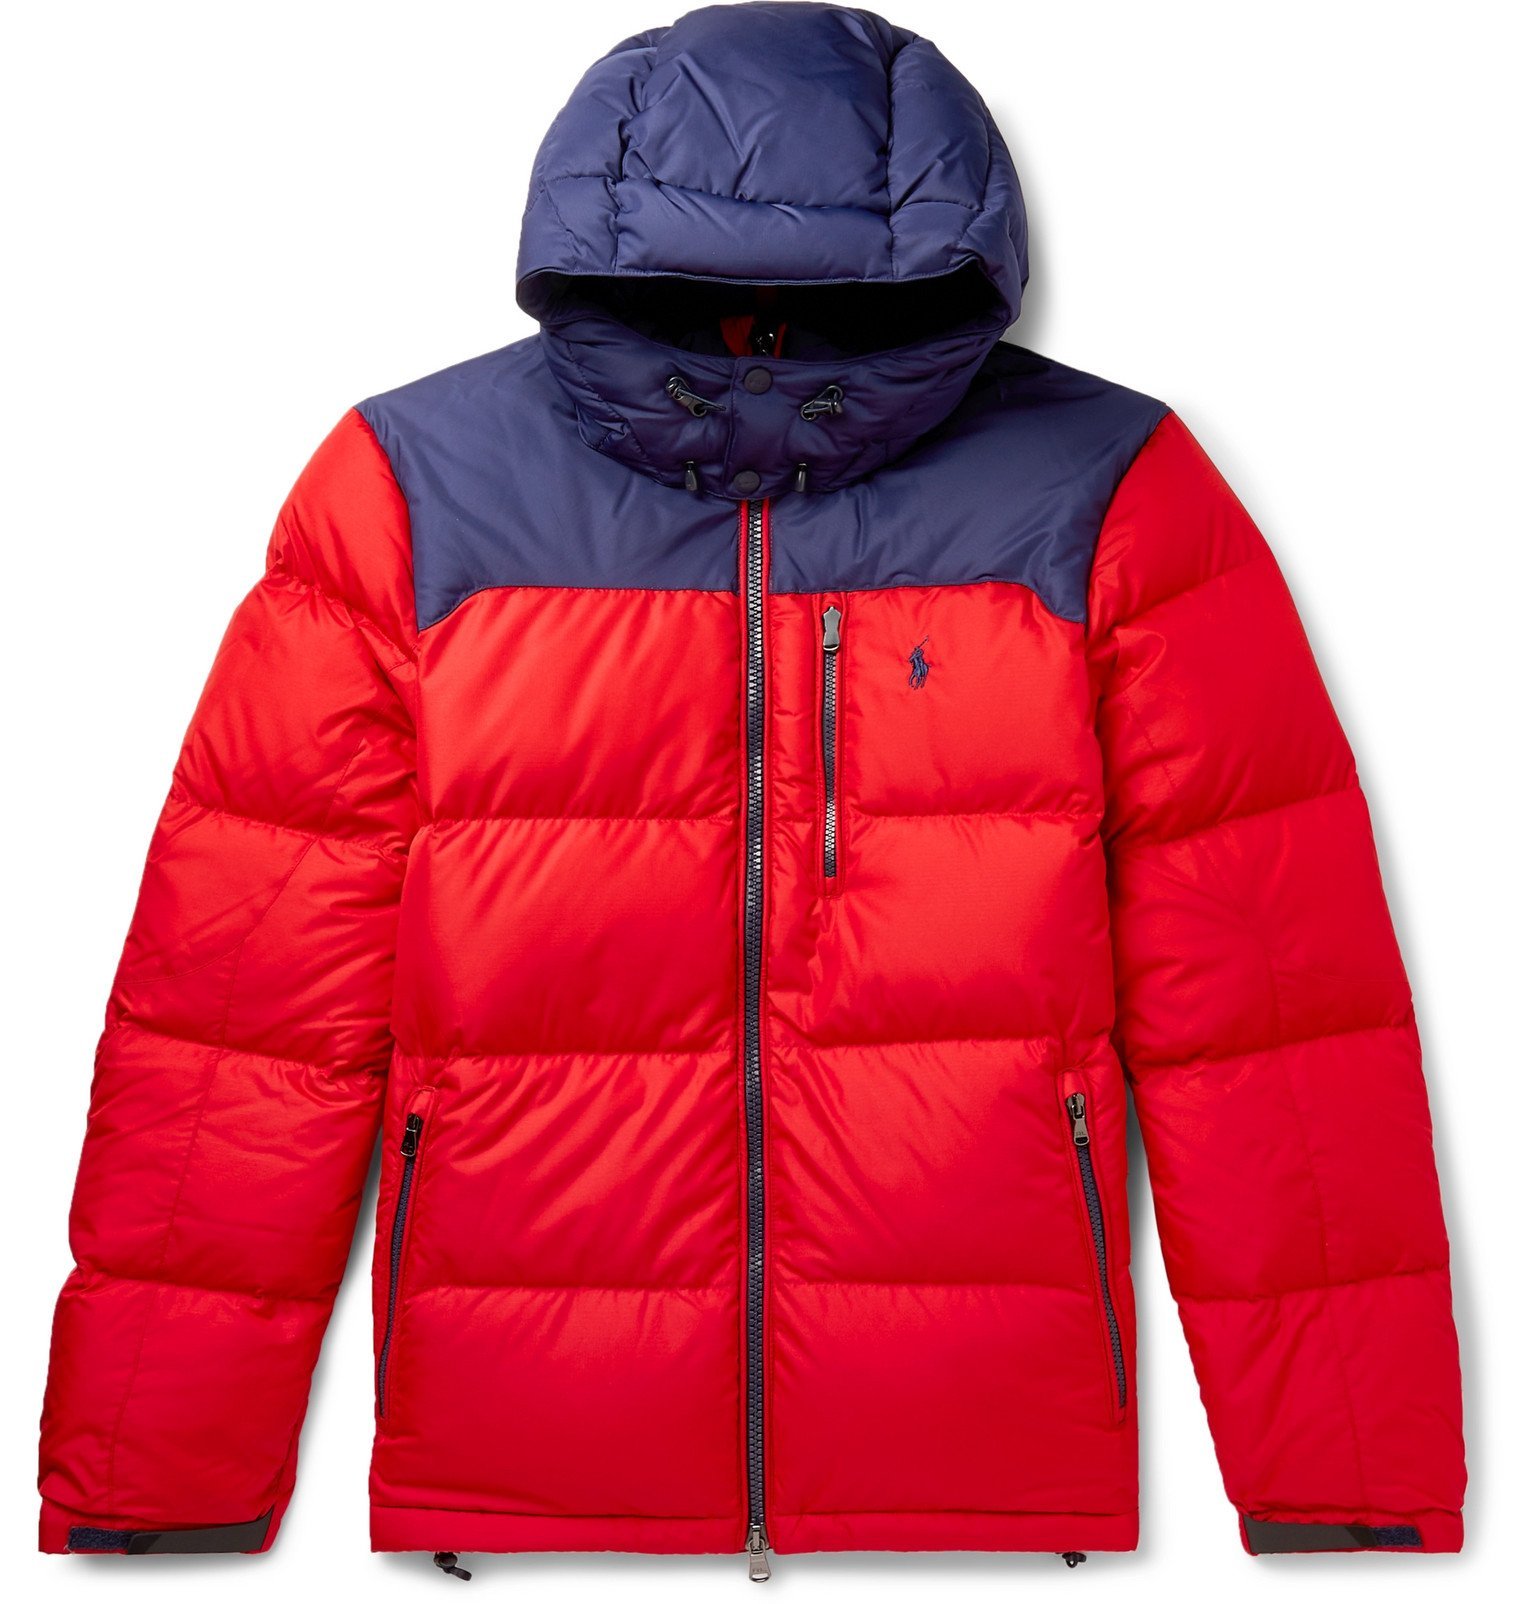 polo hooded down jacket